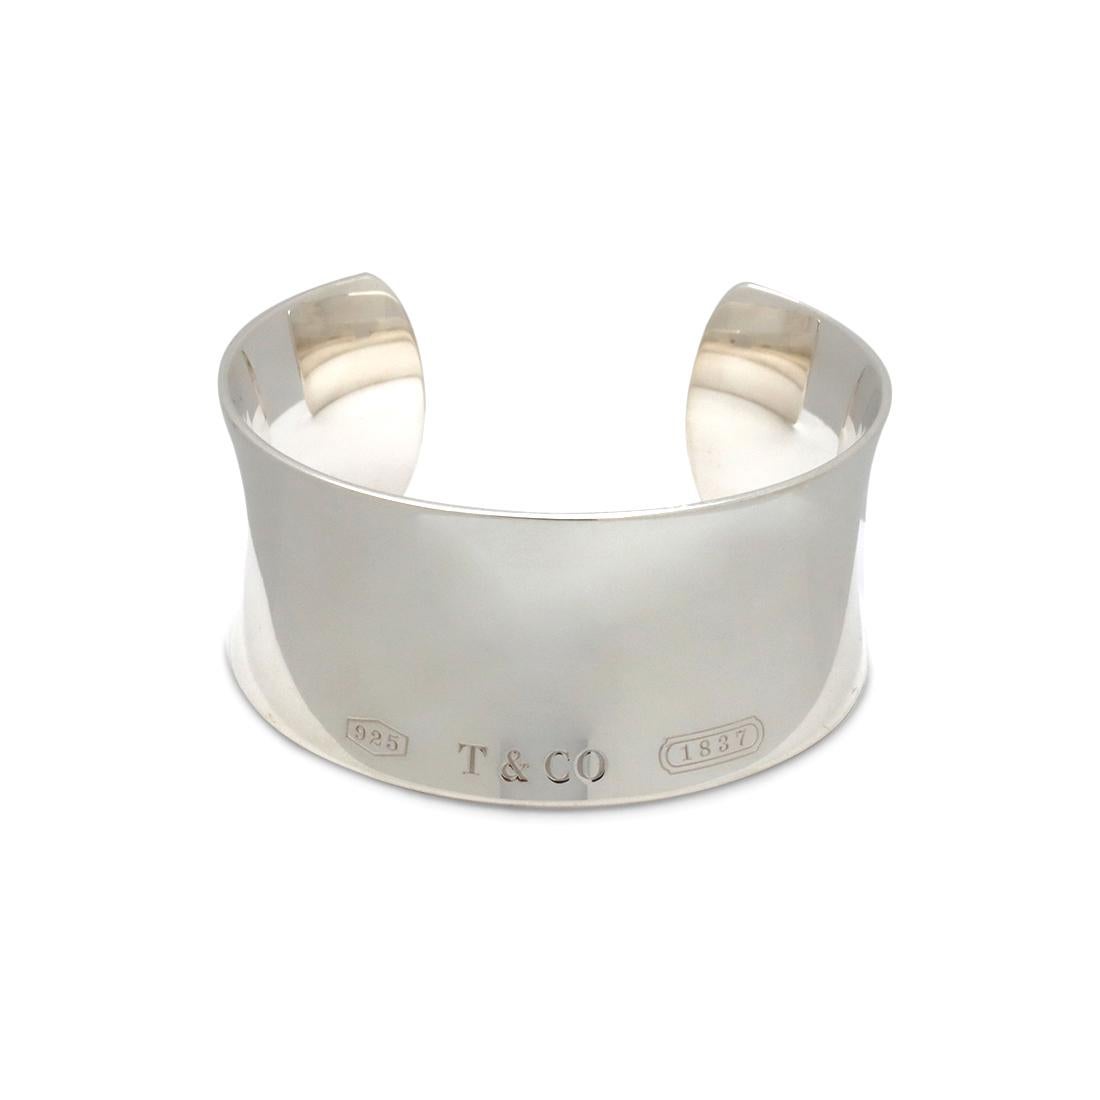 Authentic Tiffany & Co. cuff crafted in sterling silver. The bracelet highlights 925, T & CO signature and 1837 along the bottom surface of the cuff as a design. The bracelet width is 30.5mm. Stamped 925 and signed Tiffany & Co. on the inside. US